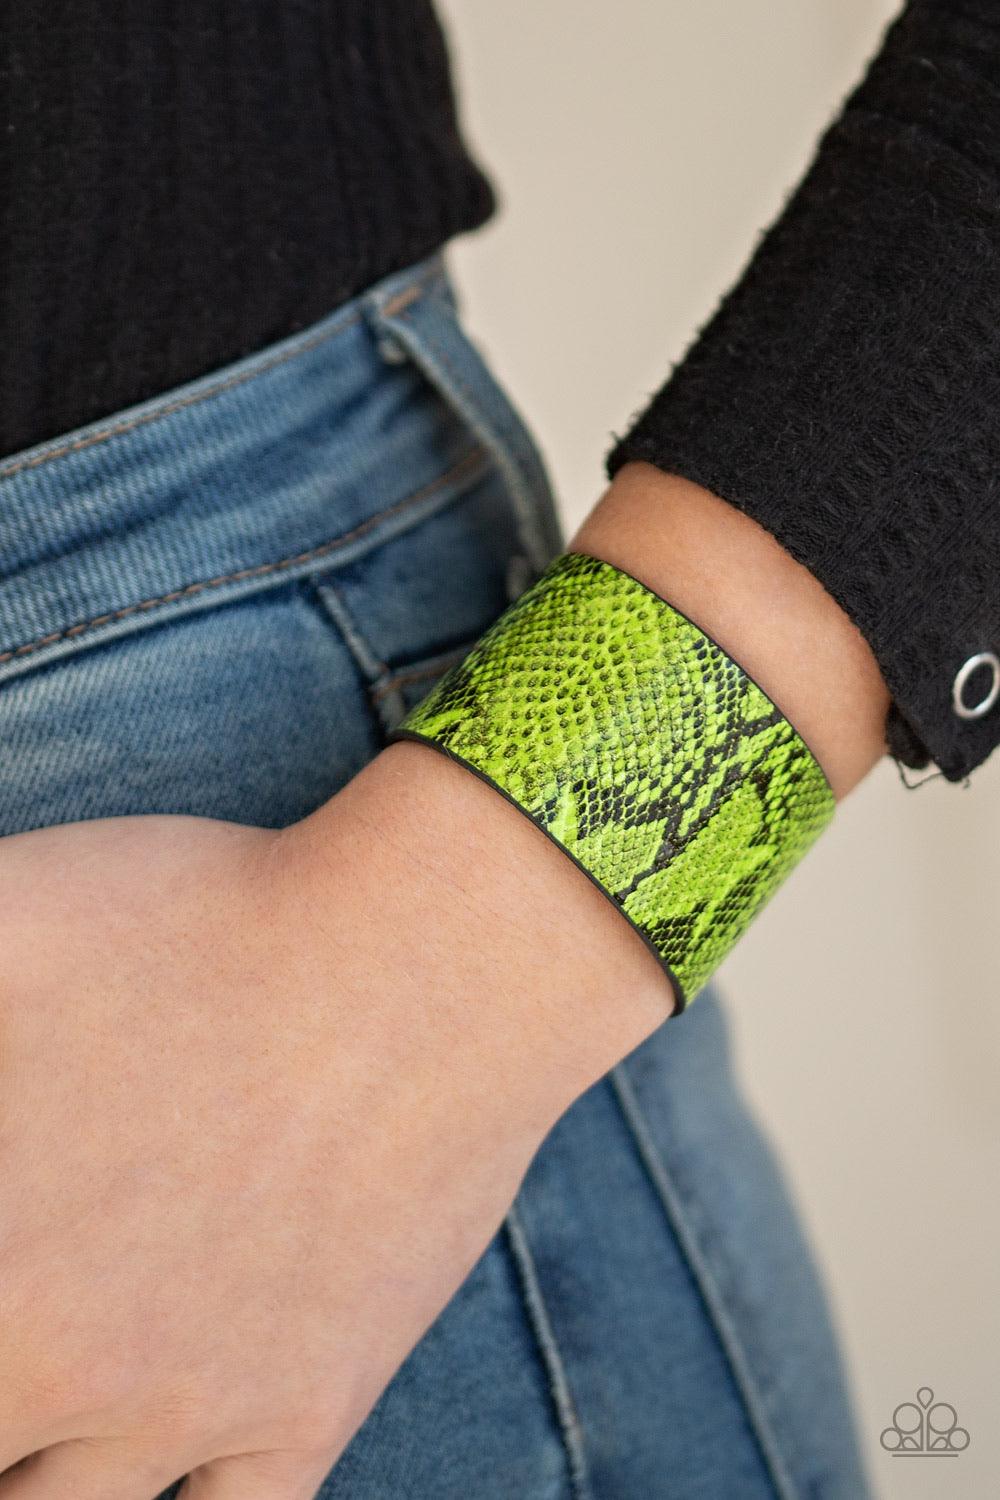 Paparazzi Accessories It’s a Jungle Out There - Green Featuring neon green python print, a thick leather band wraps around the wrist for a colorfully wild look. Features an adjustable snap closure. Jewelry